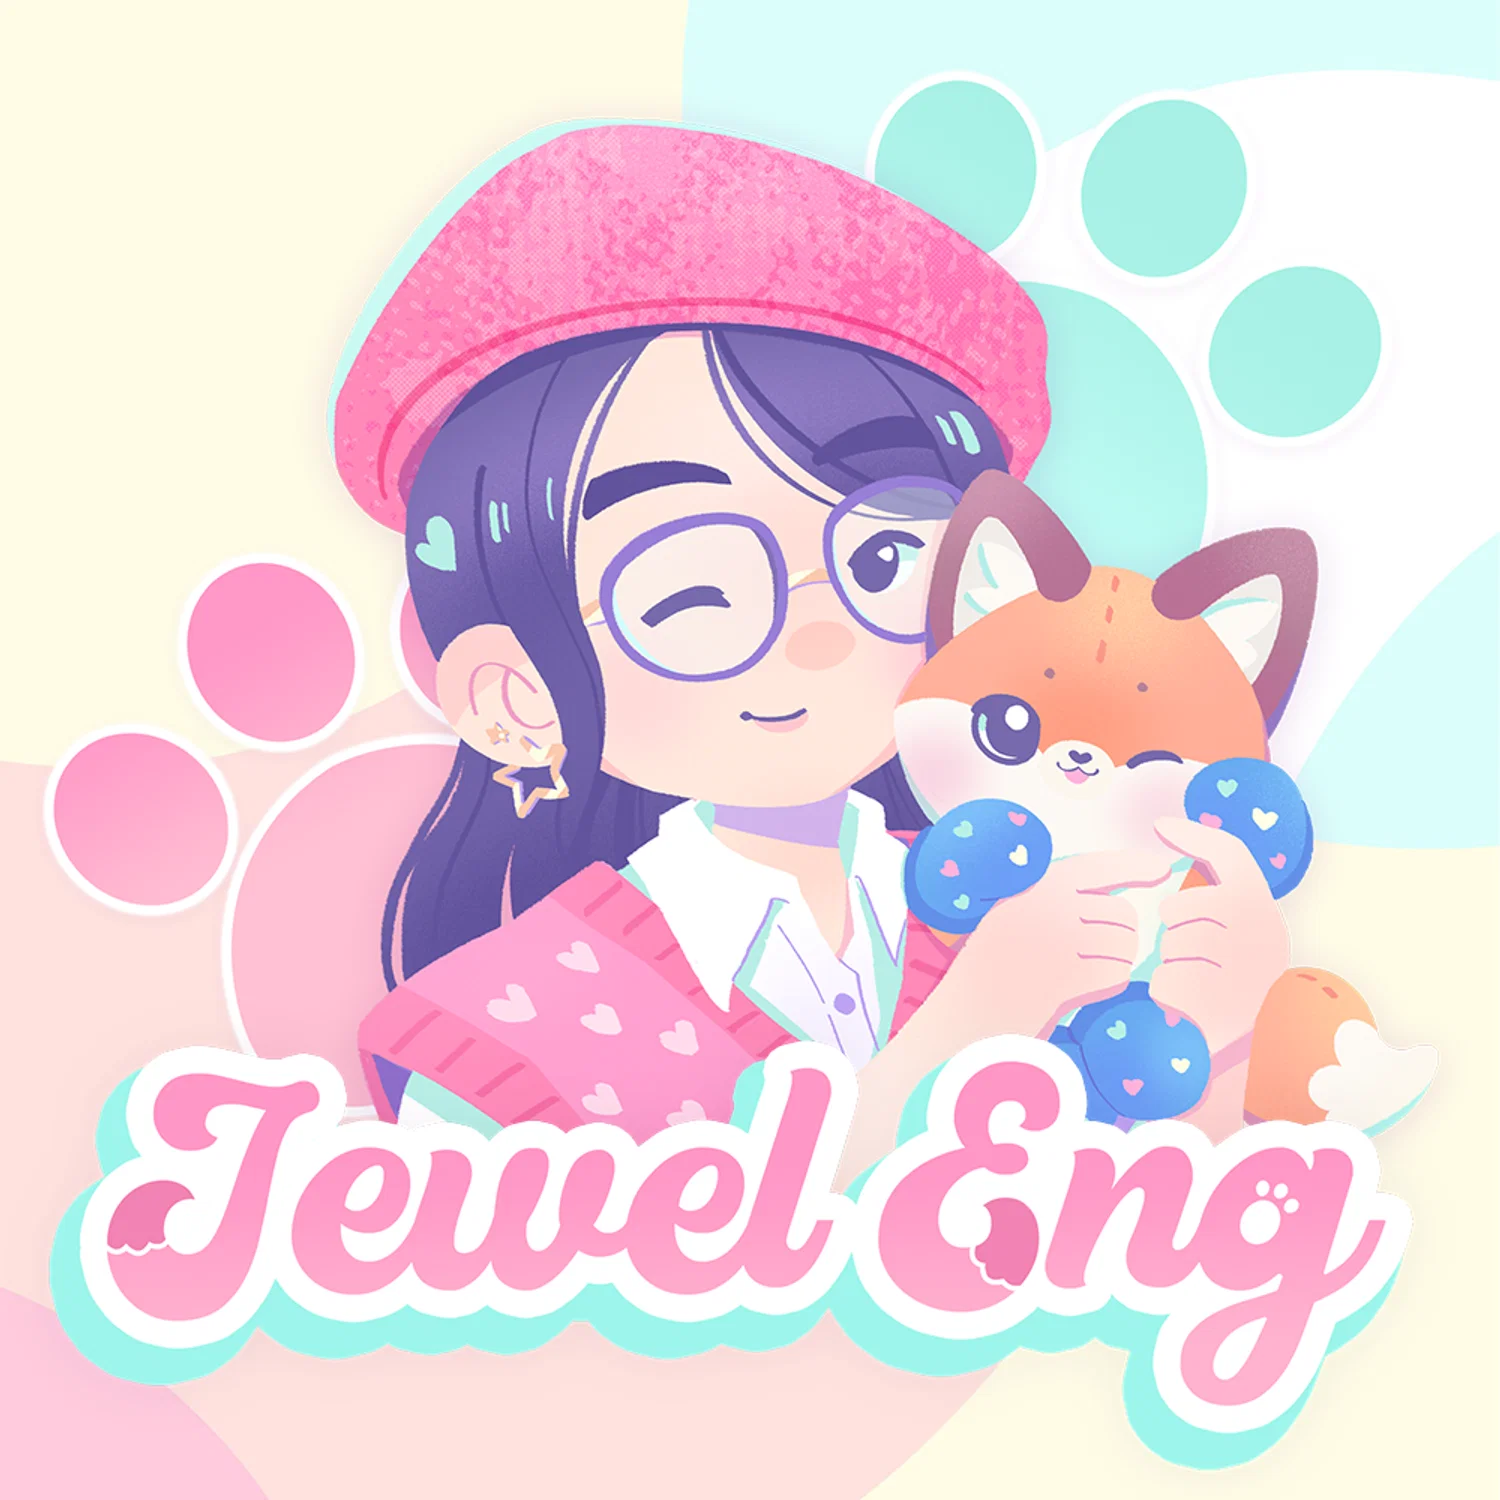 A simplified portrait of a girl with a pink beret and sweater vest holding up a plush fox wearing socks to her cheek in a soft pastel color scheme.